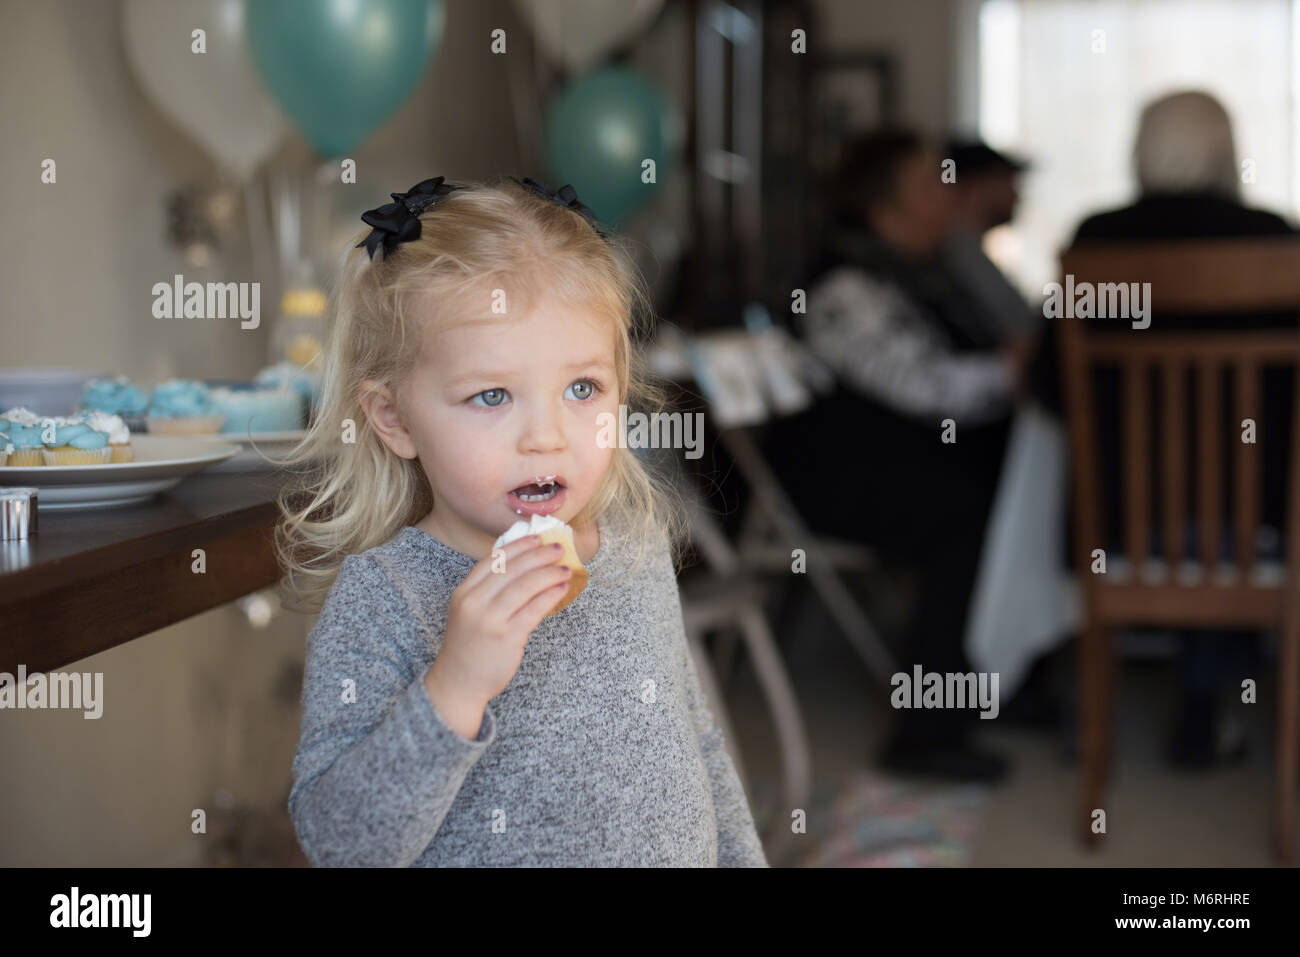 young girl at family birthday party eating a cupcake Stock Photo